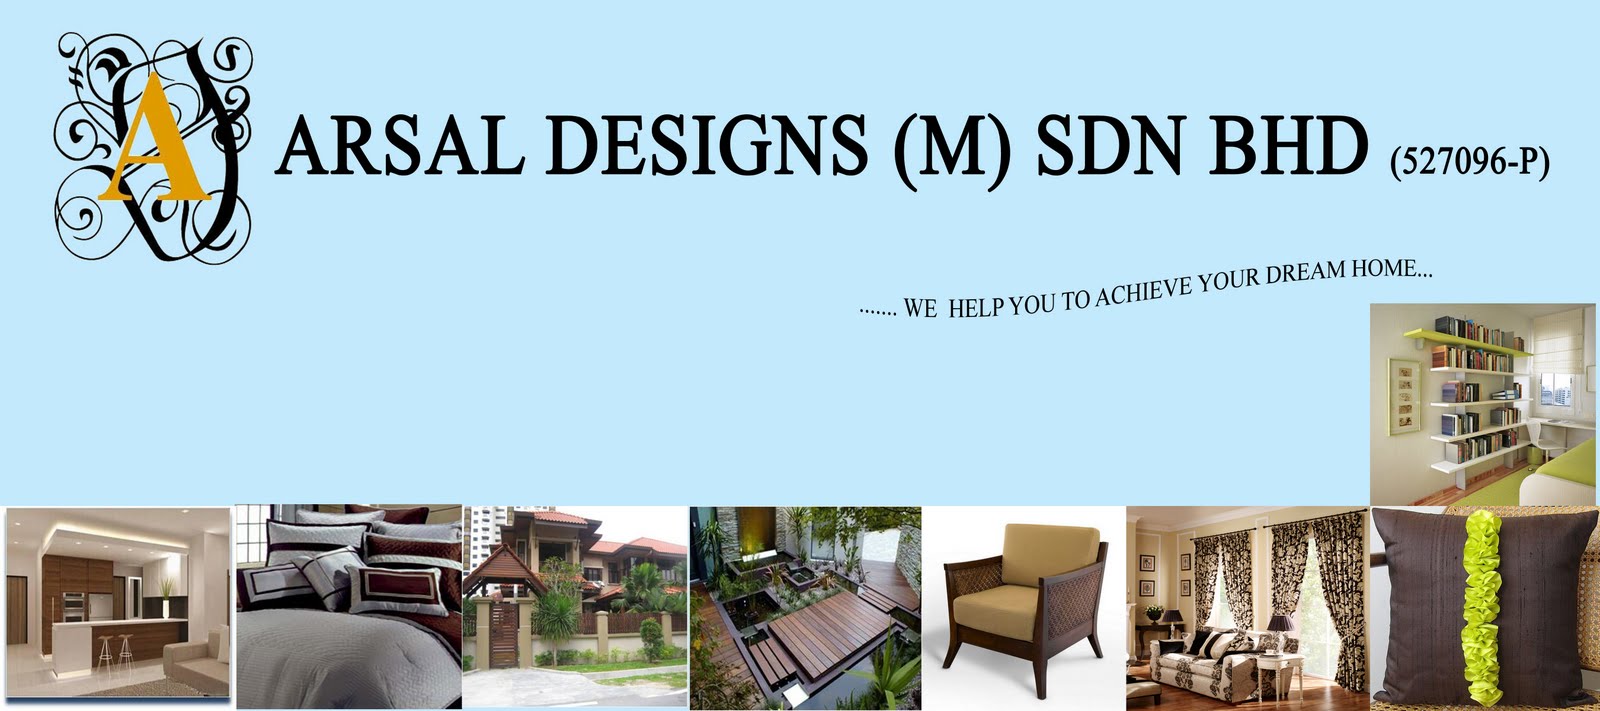 WELCOME TO ARSAL DESIGNS (M) SDN BHD